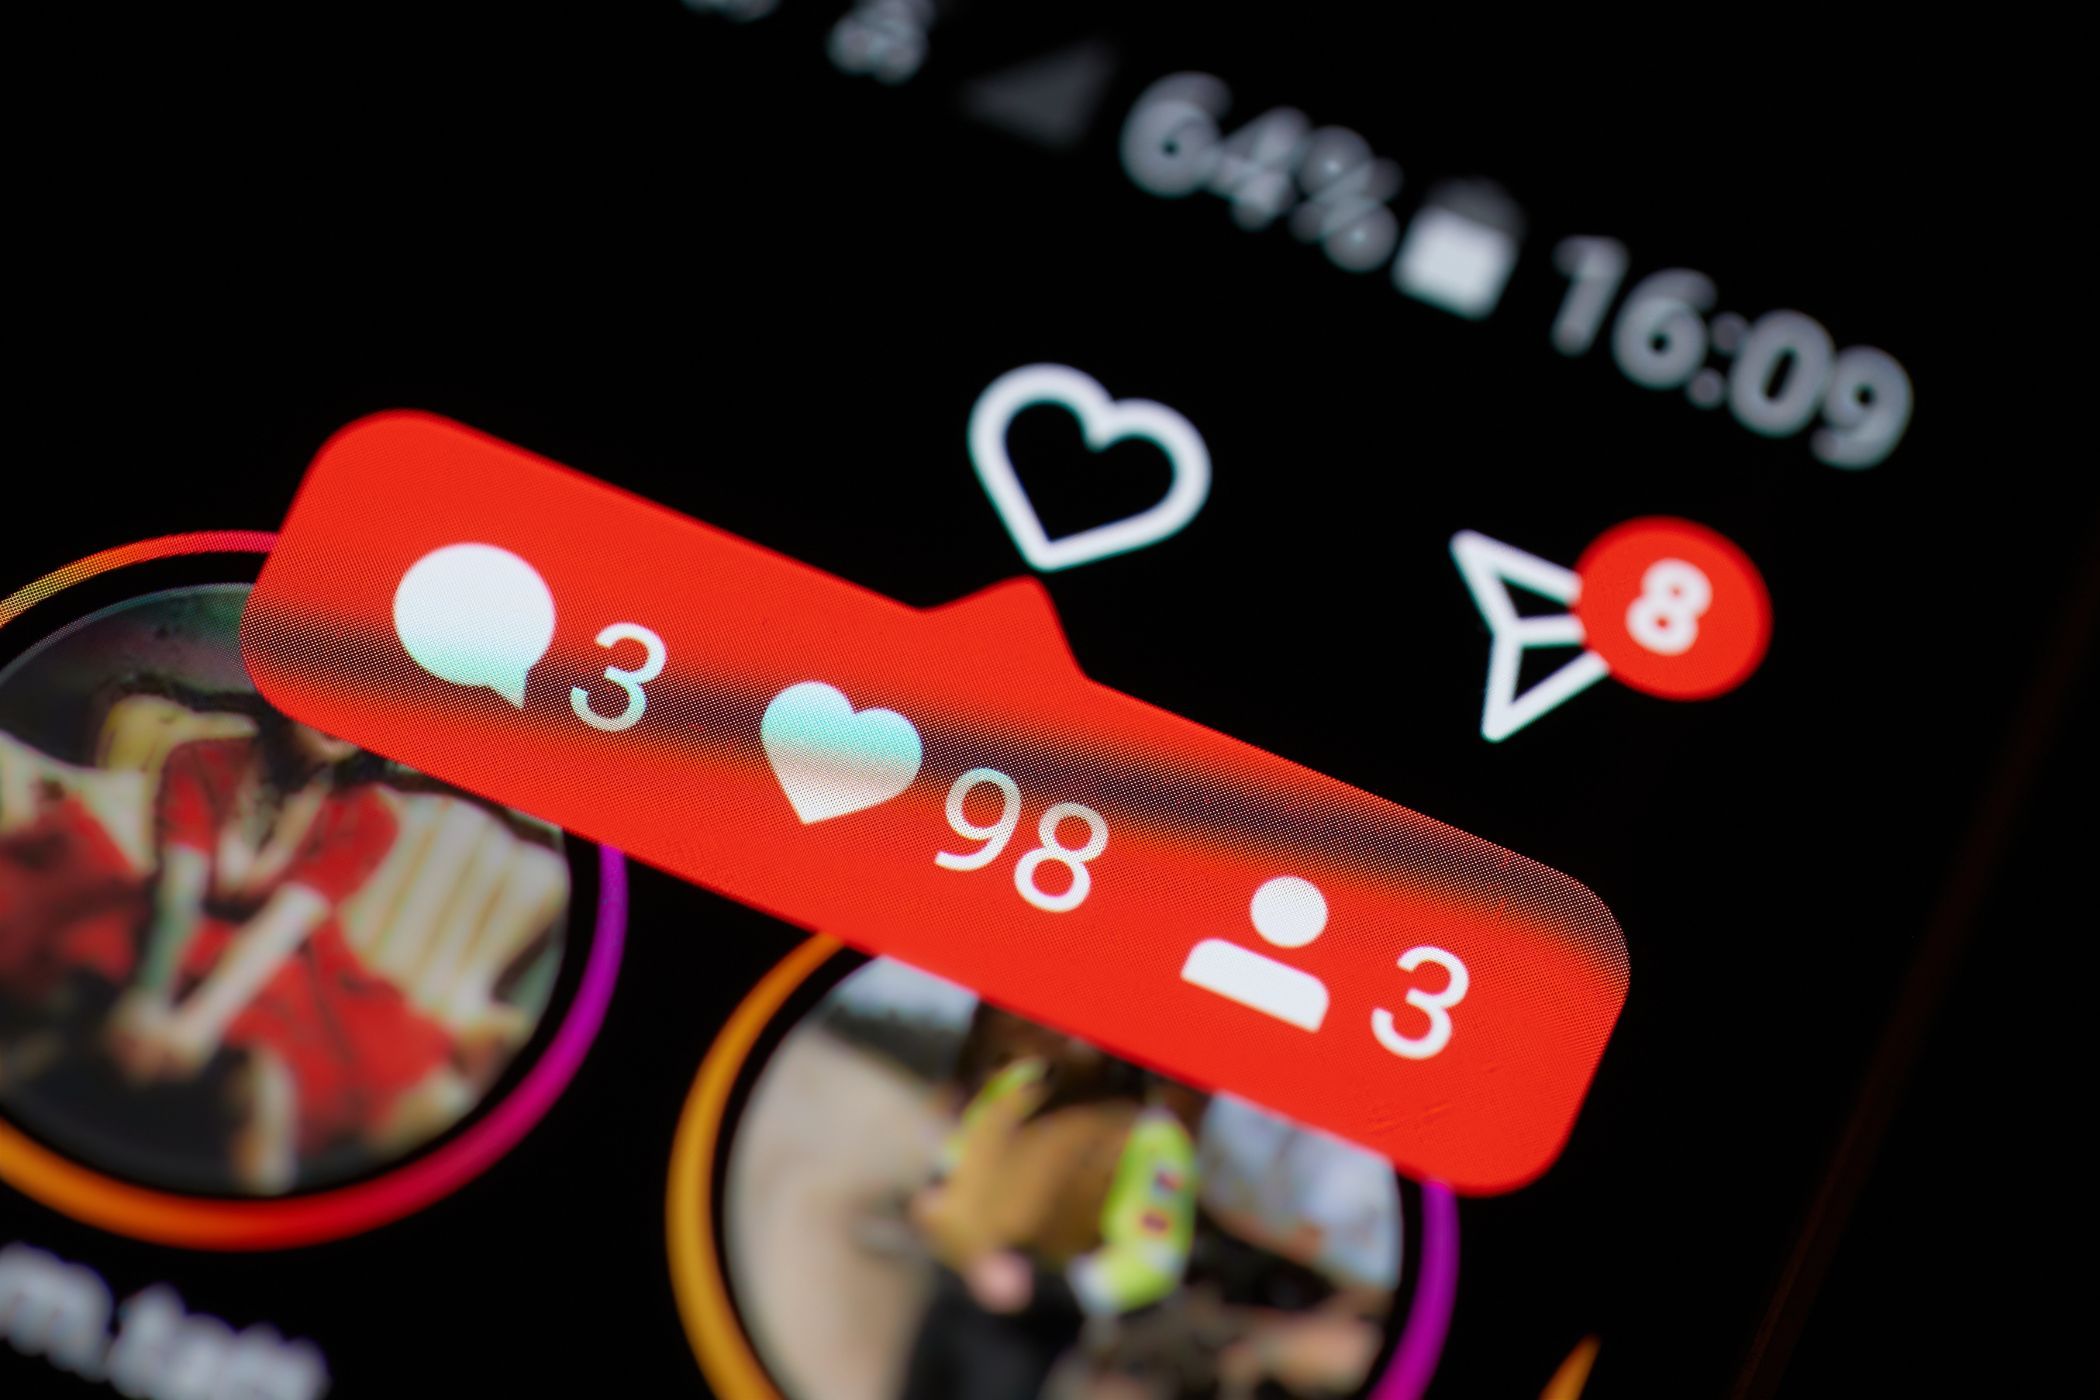 engagement and follower notifications on instagram